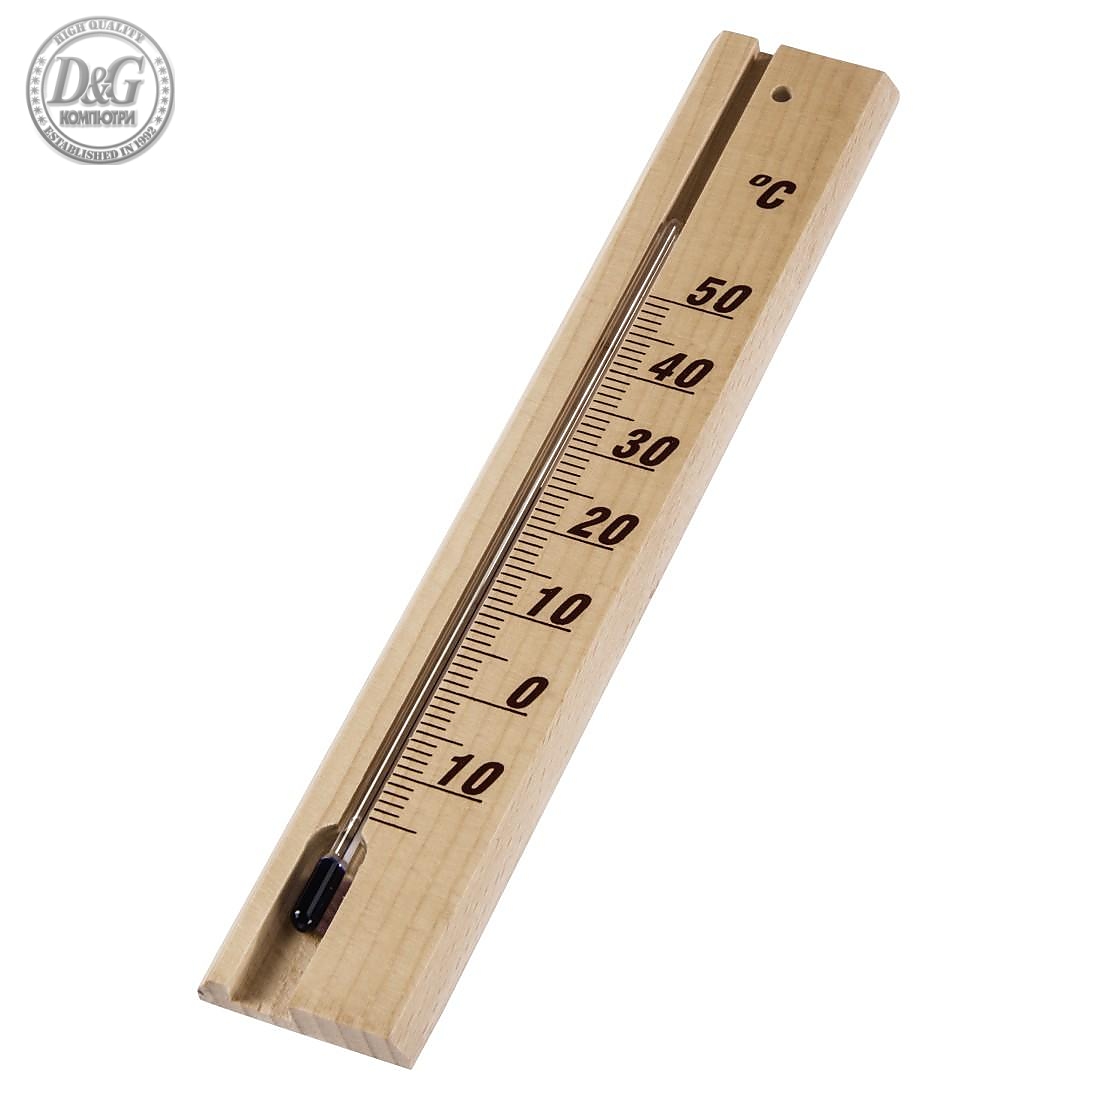 Hama Thermometer, for interior, wood, 20 cm, analogue